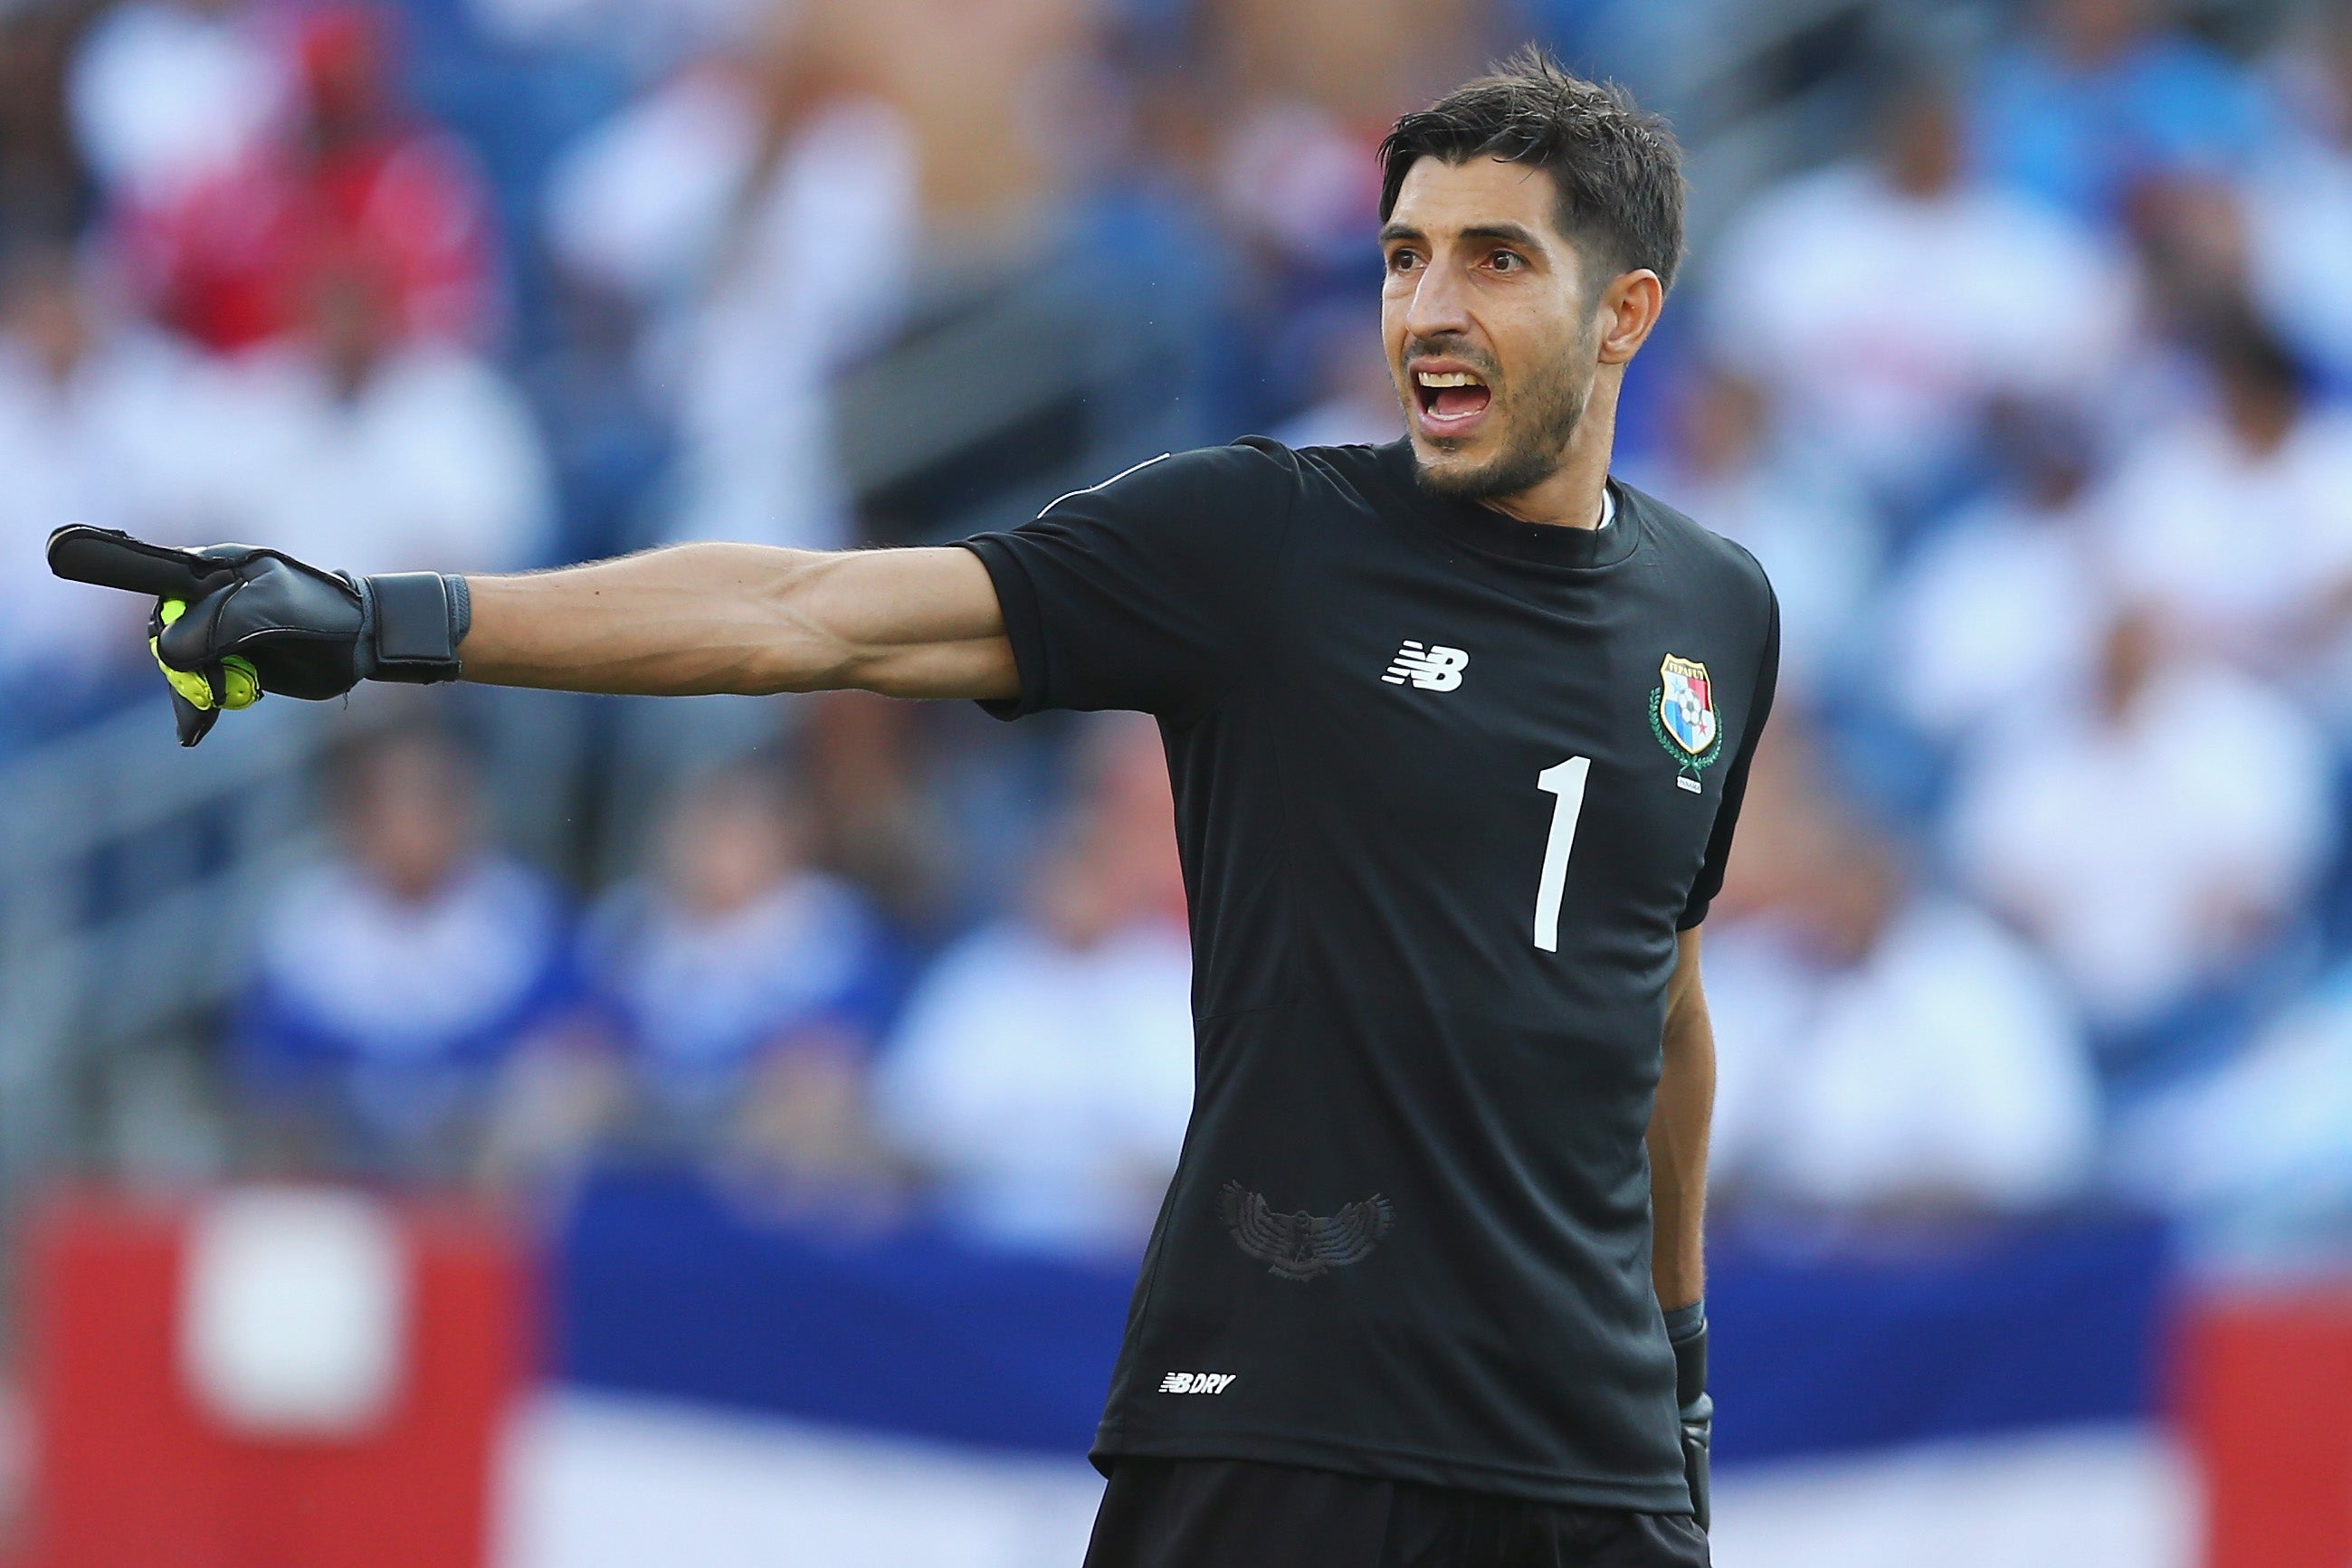 FOXBORO, MA - JULY 10: Jaime Penedo #1 of Panama directs his team during the 2015 CONCACAF Gold Cup match between Honduras and Panama at Gillette Stadium on July 10, 2015 in Foxboro, Massachusetts. (Photo by Maddie Meyer/Getty Images)